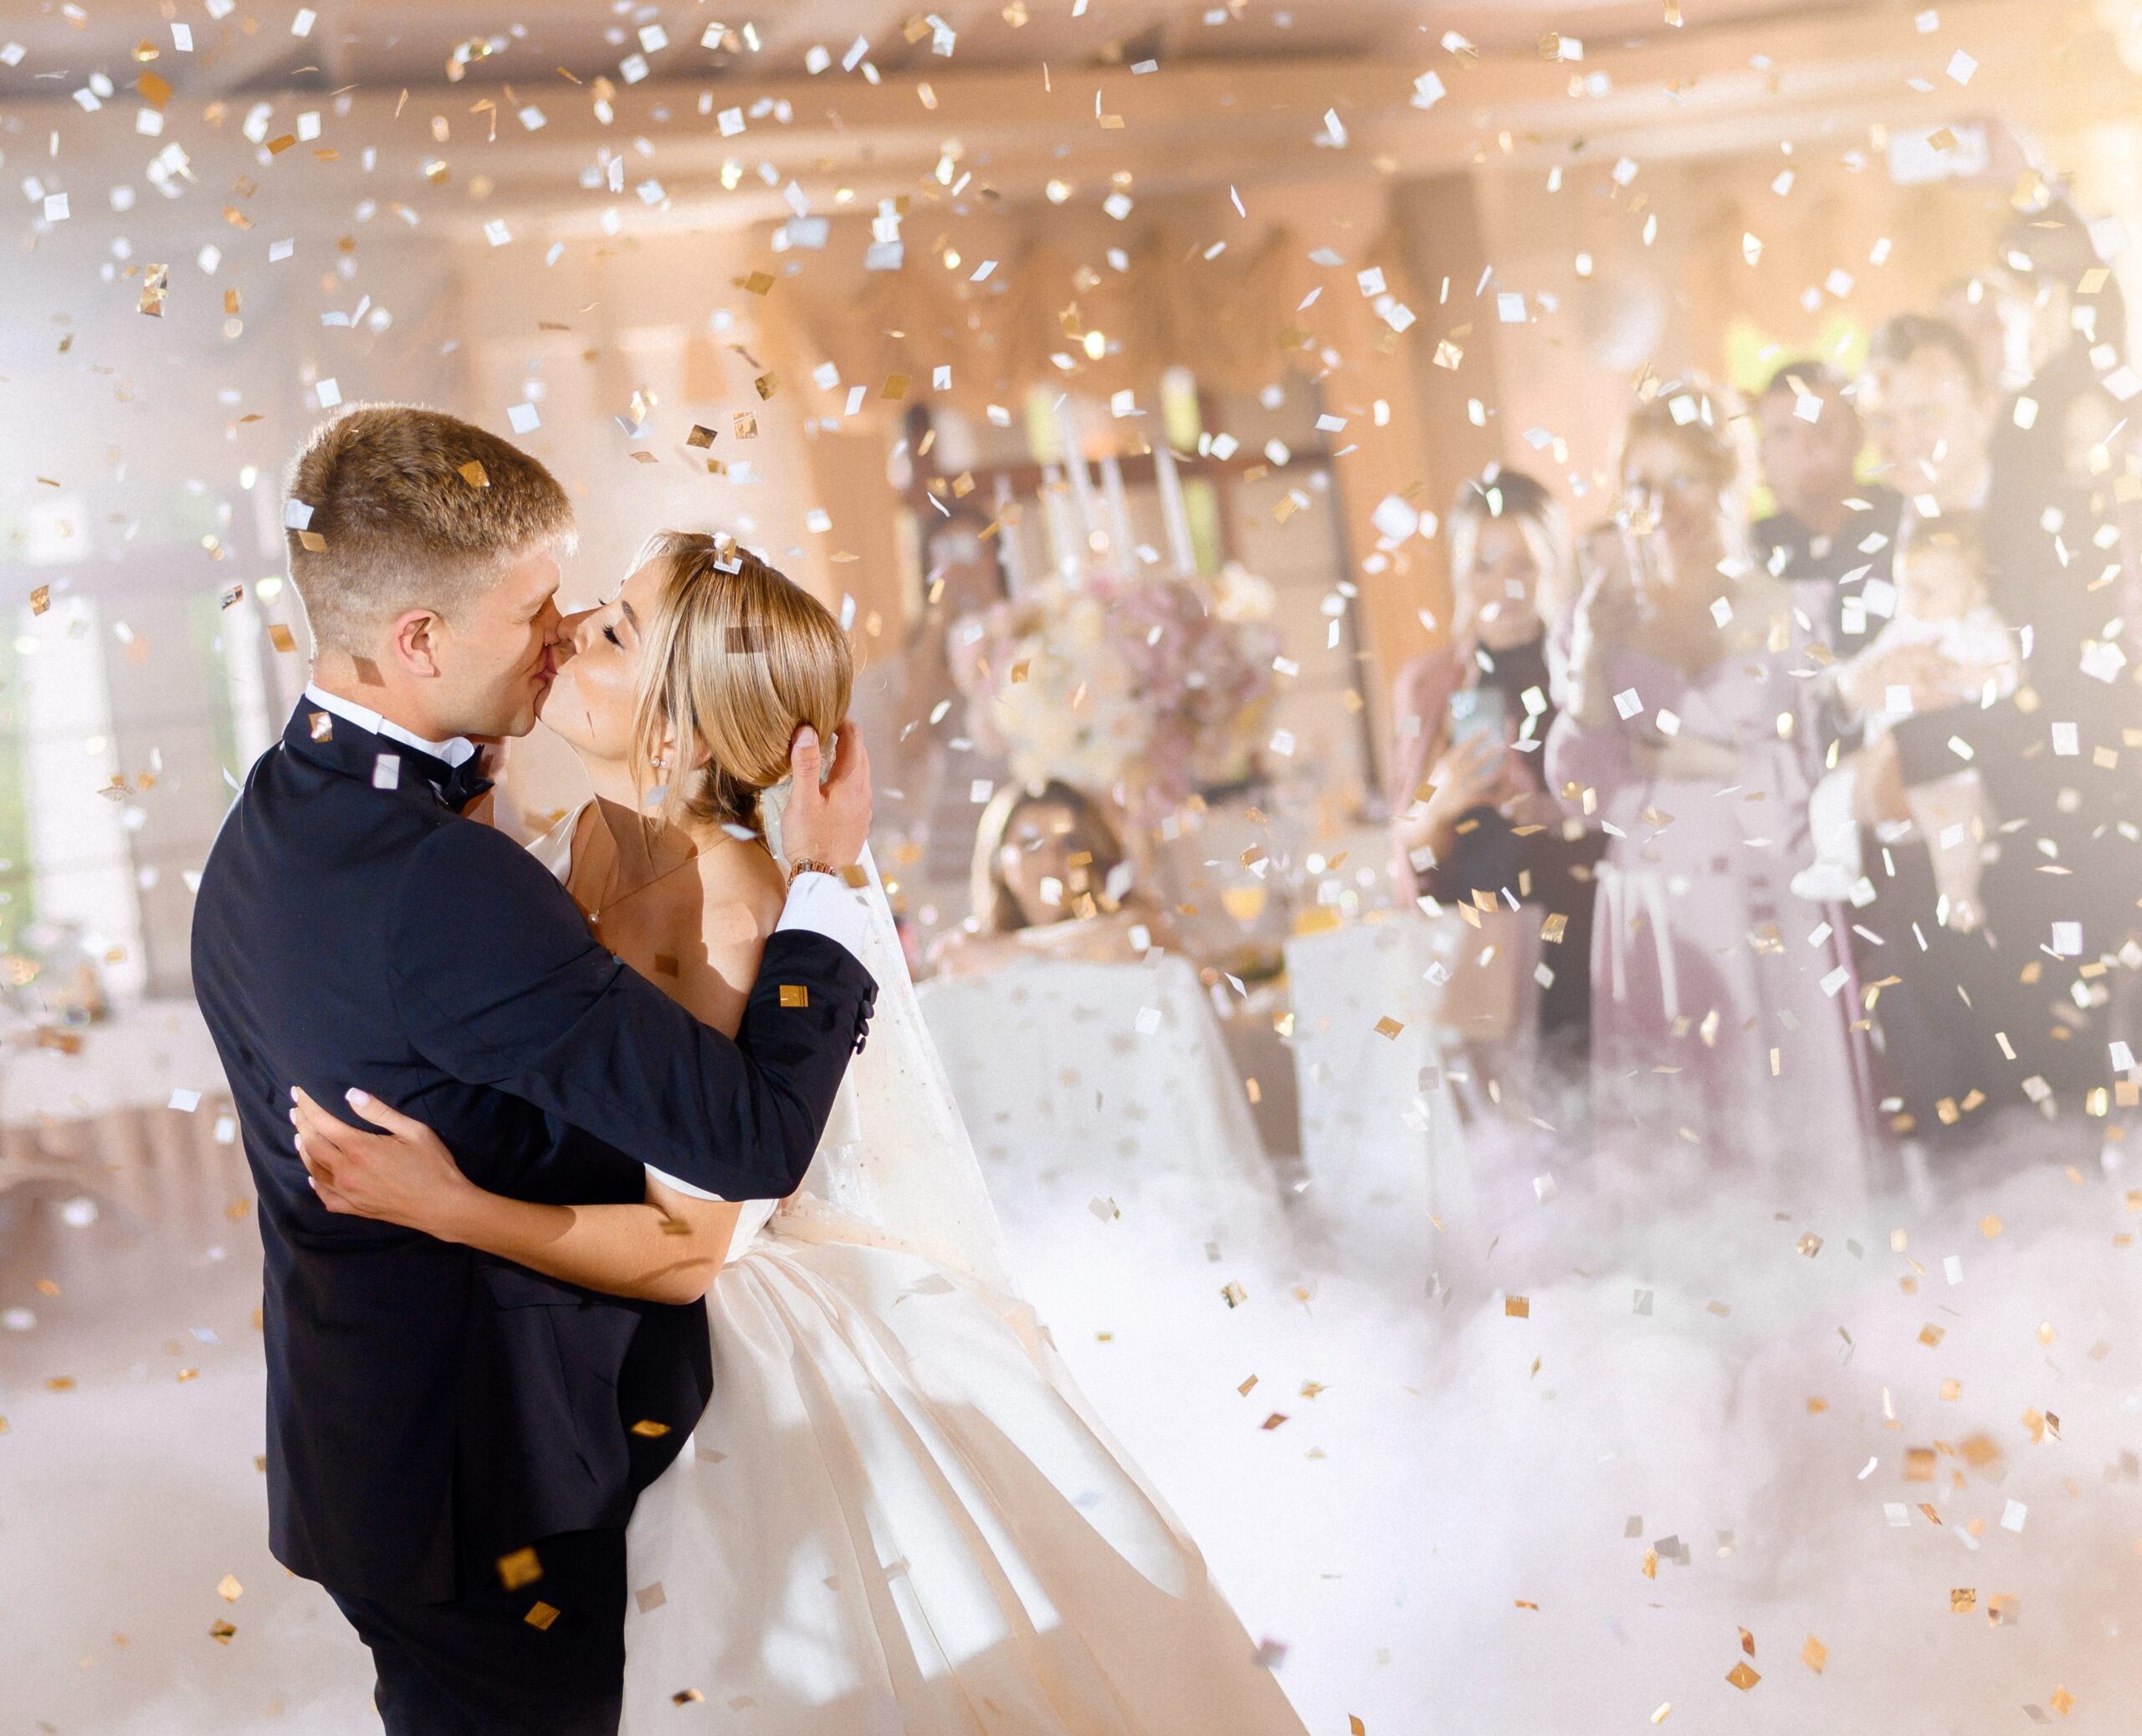 brides-kissing-and-hugging-while-falling-confetti